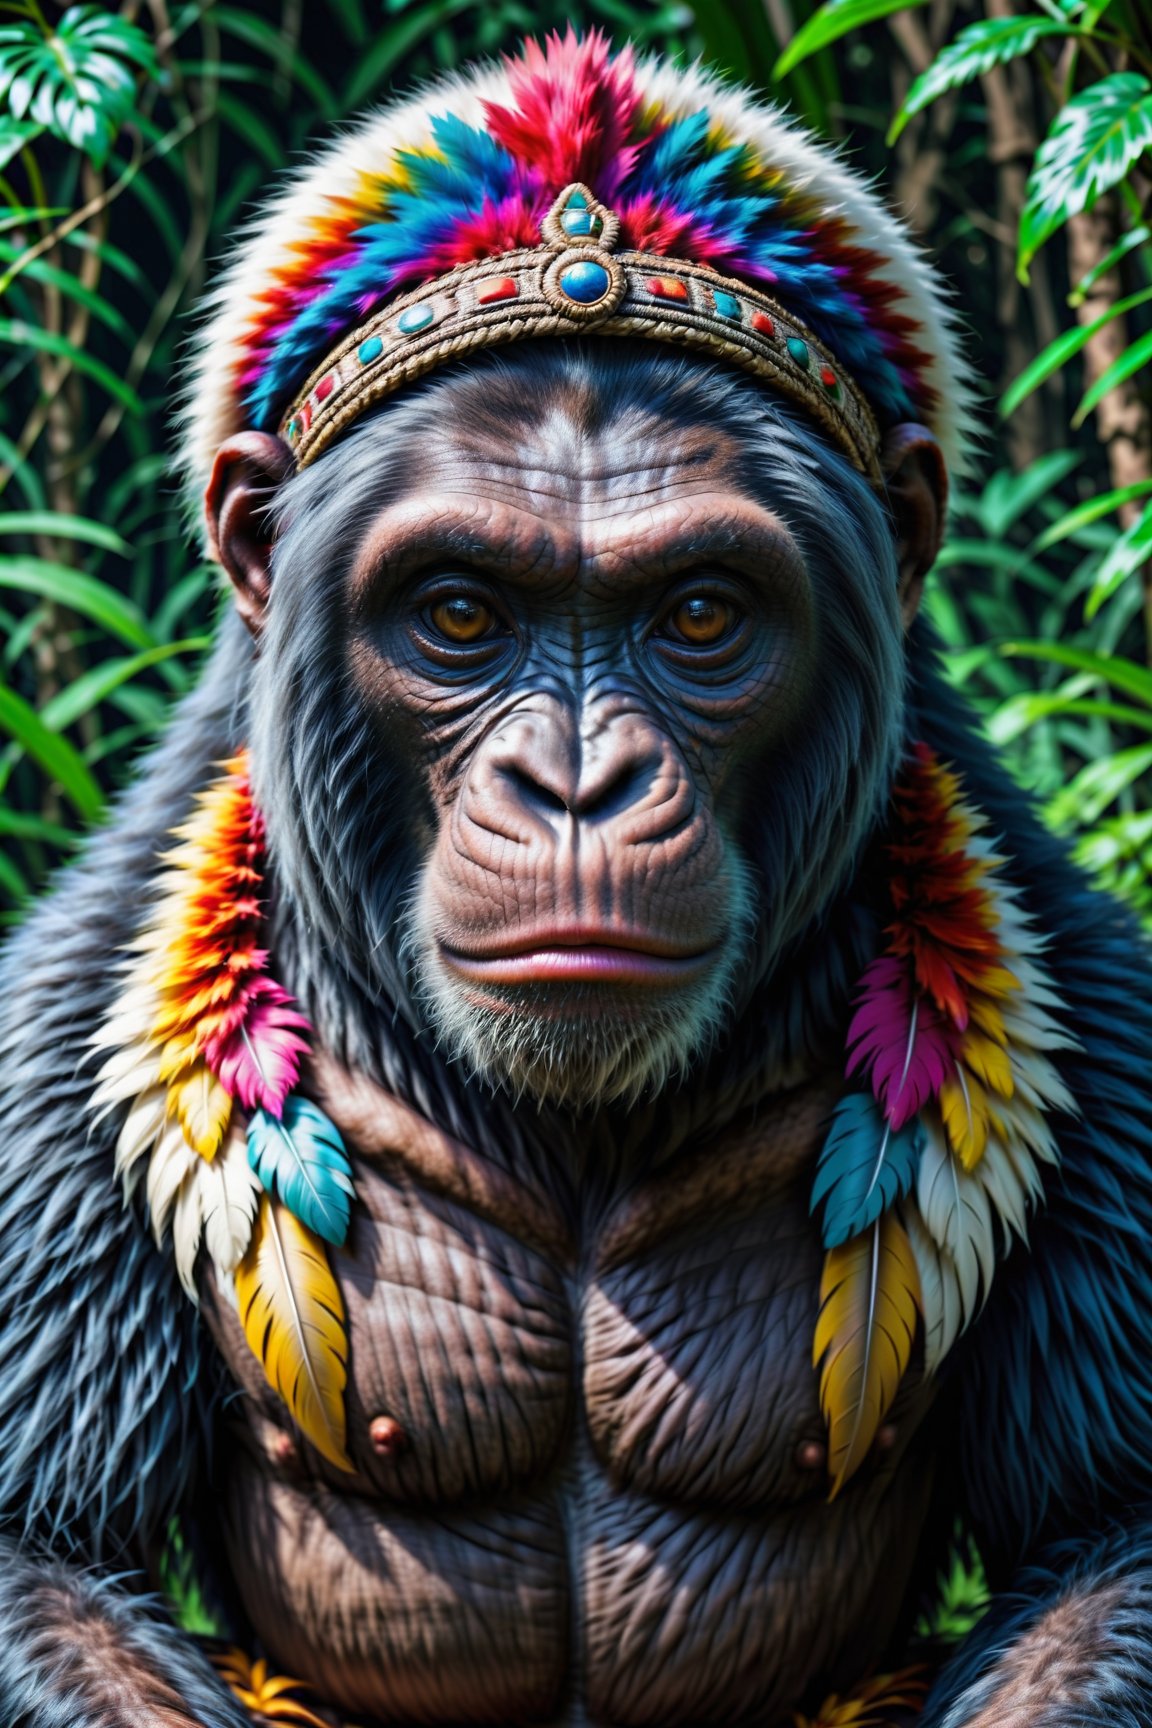 Chimpanzee with indigenous headdress on head, ((meditating)) colorful feathers, facing the camera, detail: sitting in the middle of dense tropical foliage, highly detailed intricate, ((masterpiece)), ultra hyperrealistic, masterpiece
